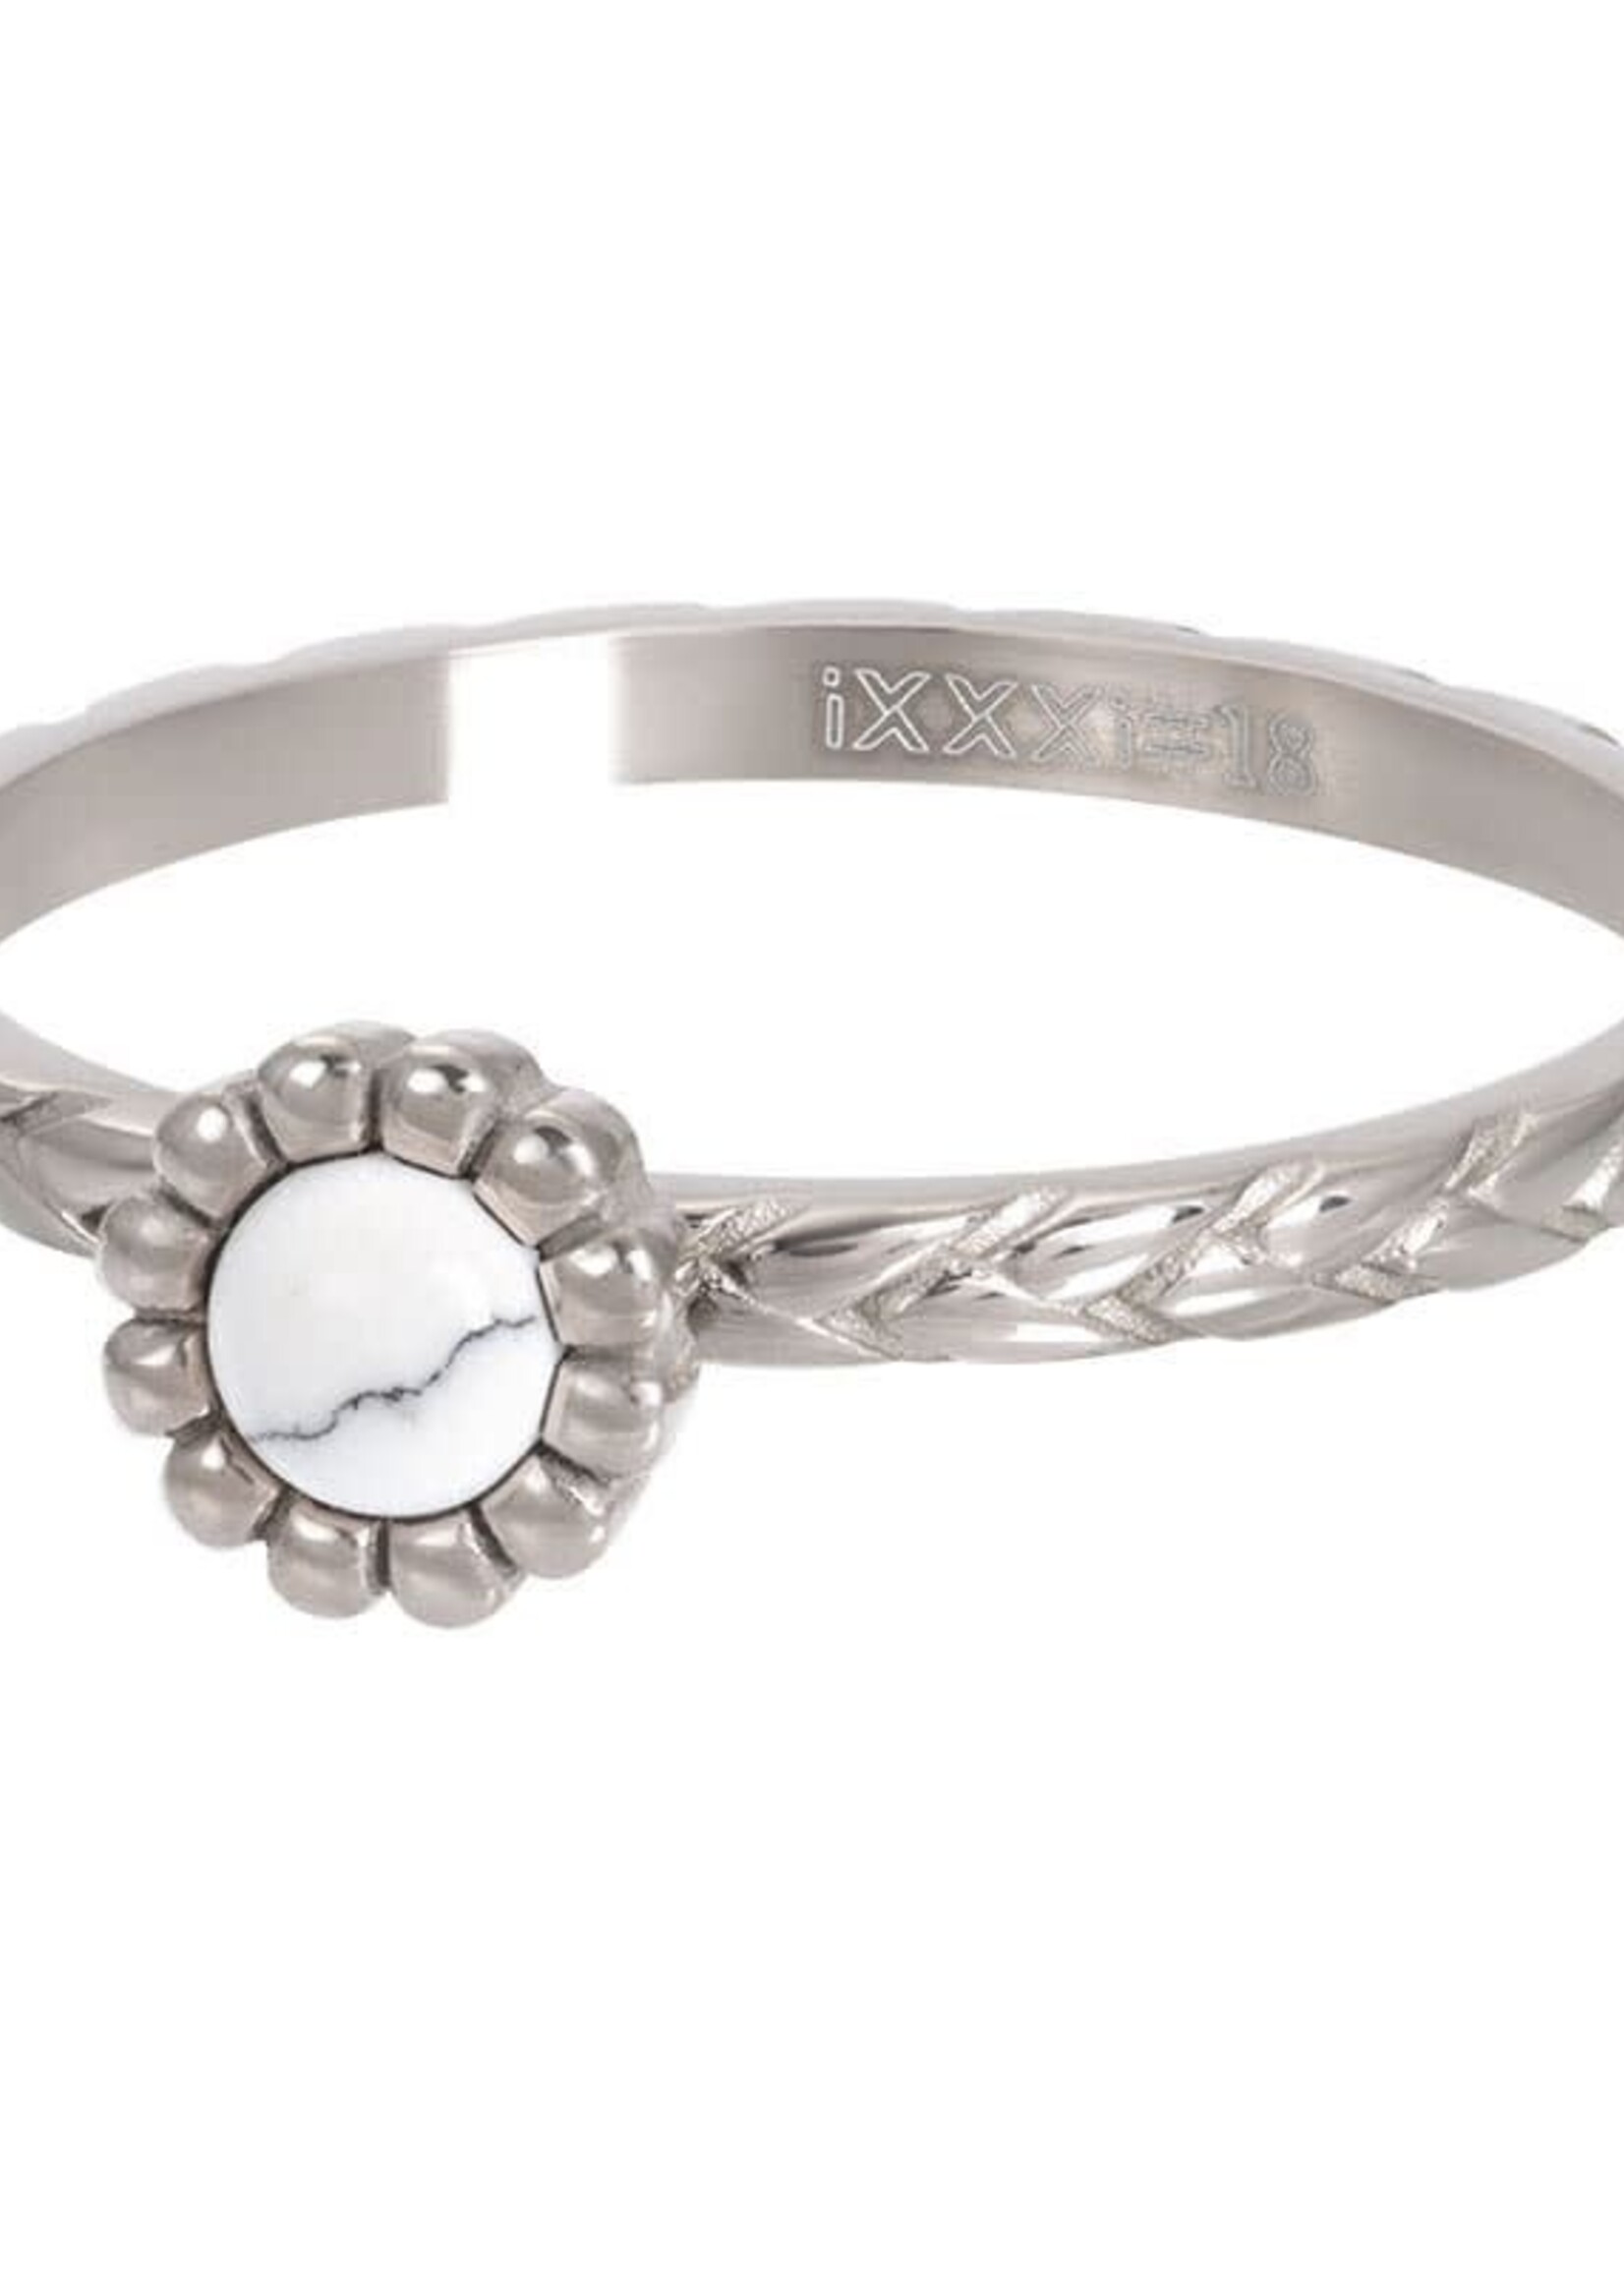 iXXXi Jewelry iXXXi vulring inspired white - staal